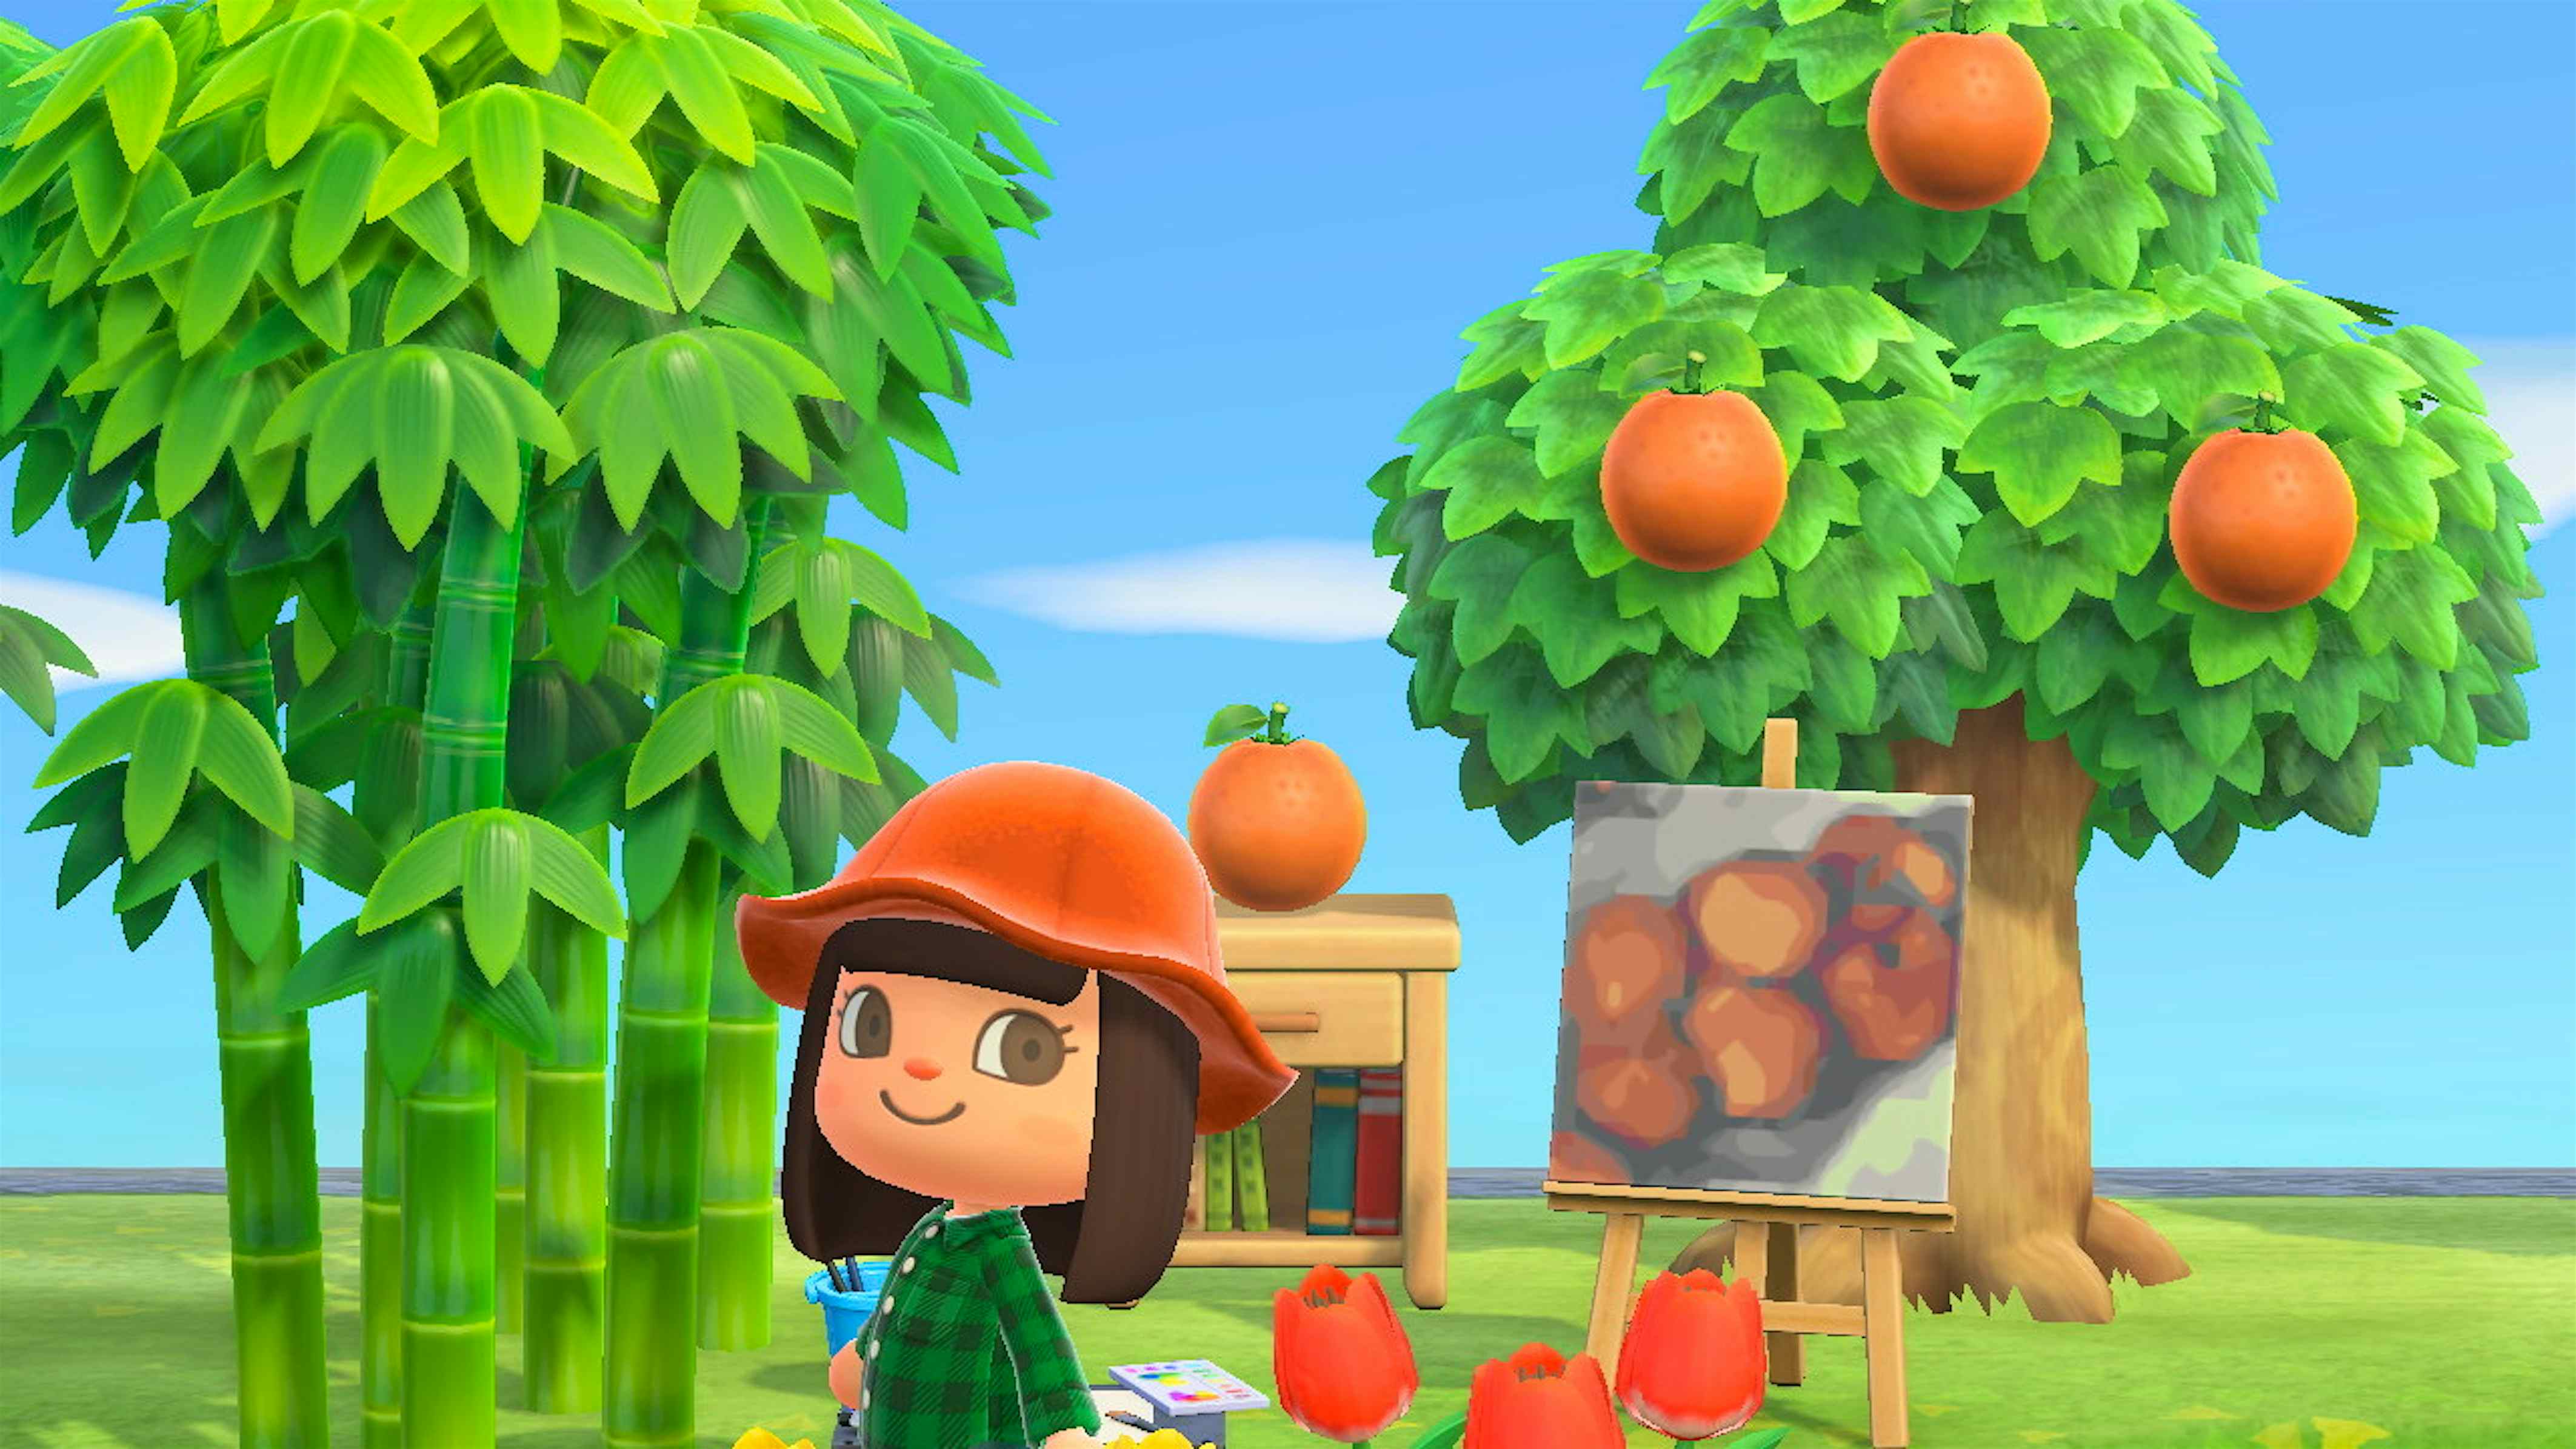 Missing museums? You can build your own art gallery in Nintendo's